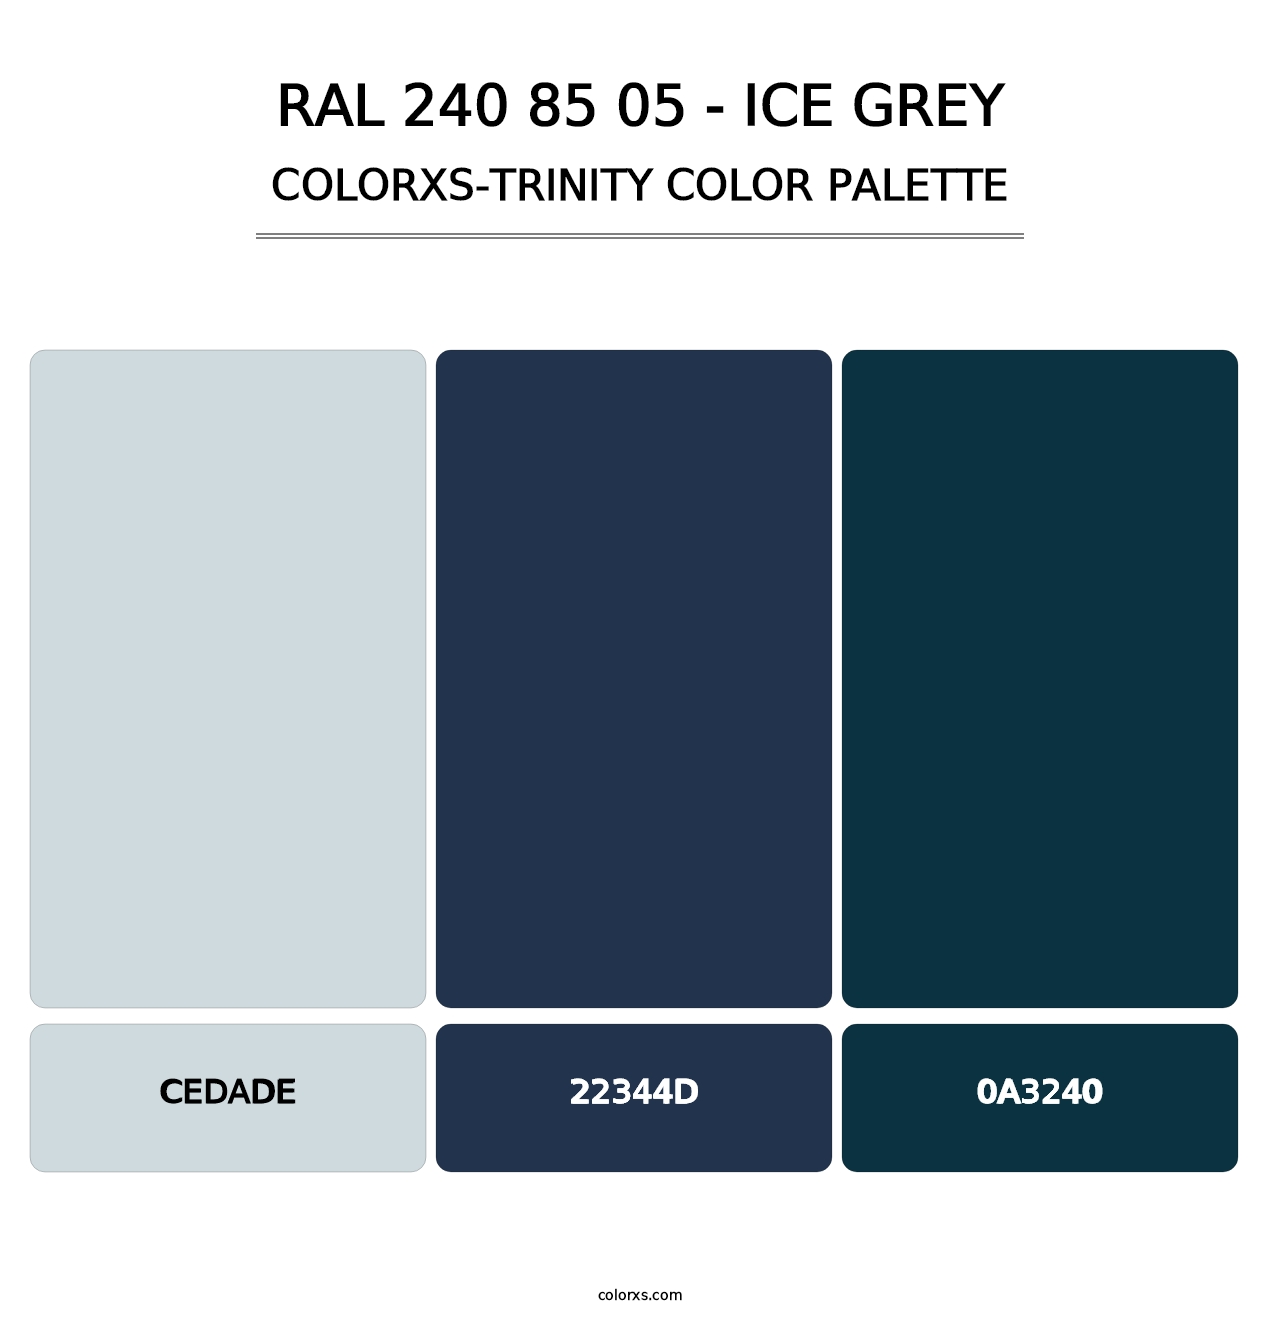 RAL 240 85 05 - Ice Grey - Colorxs Trinity Palette